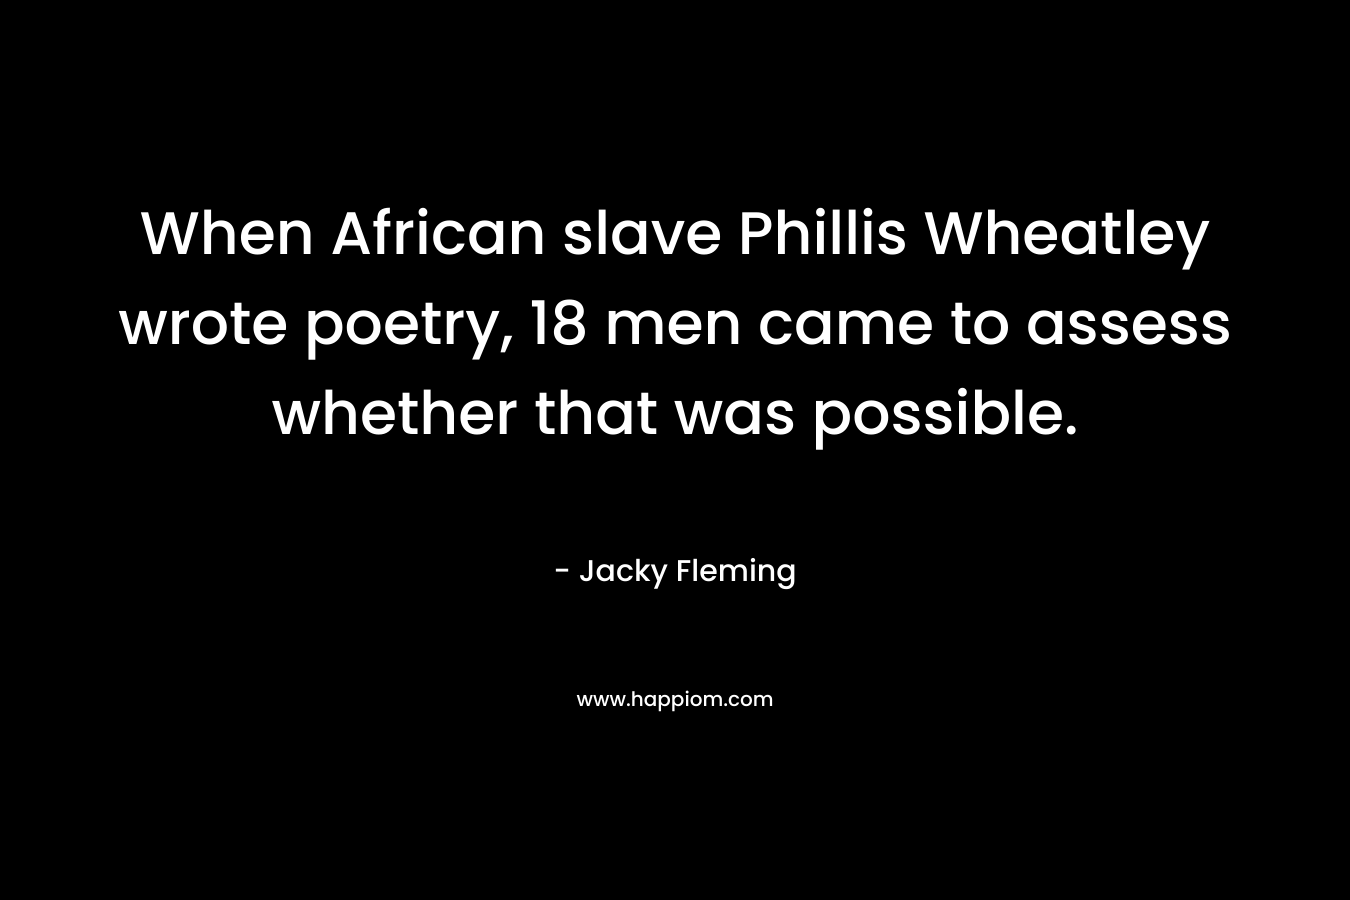 When African slave Phillis Wheatley wrote poetry, 18 men came to assess whether that was possible.